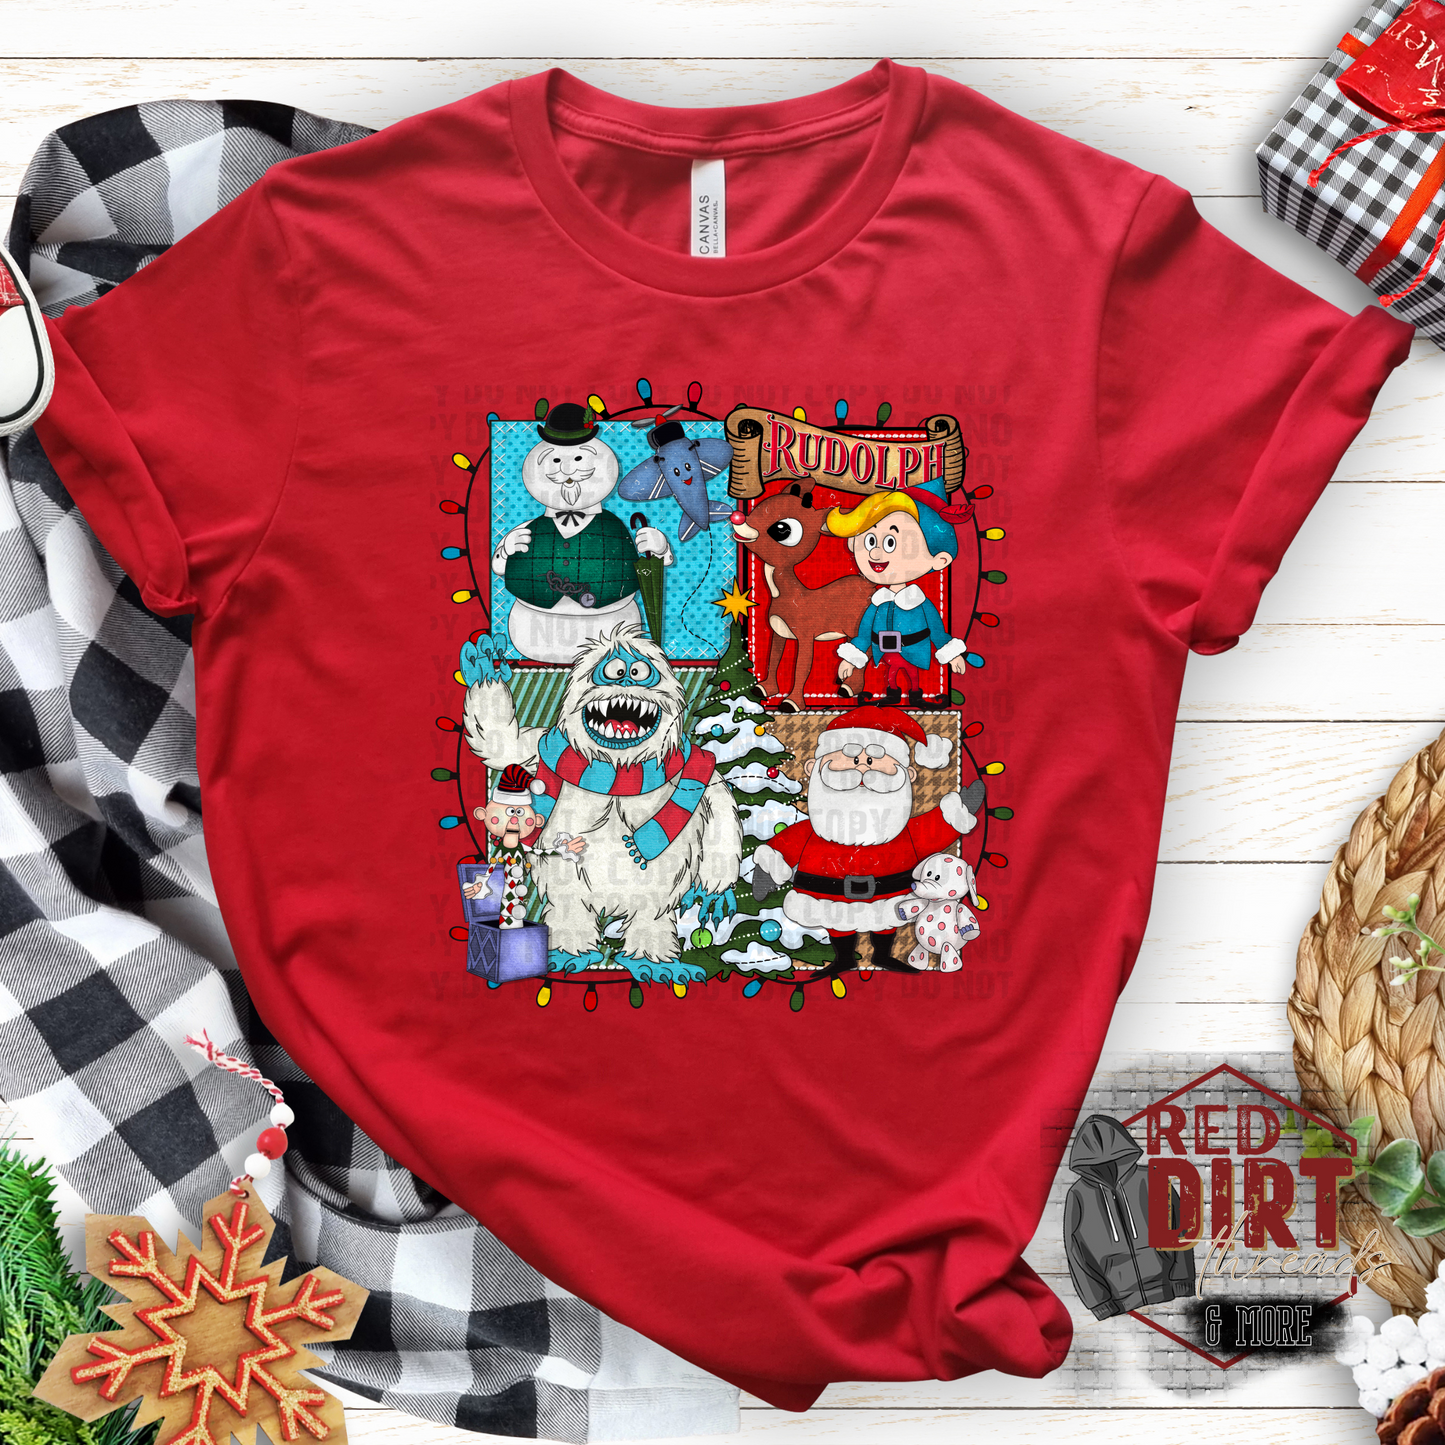 Christmas Deer With A Red Nose T-Shirt | Vintage Christmas Movie Shirt | Fast Shipping | Super Soft Shirts for Women/Kid's